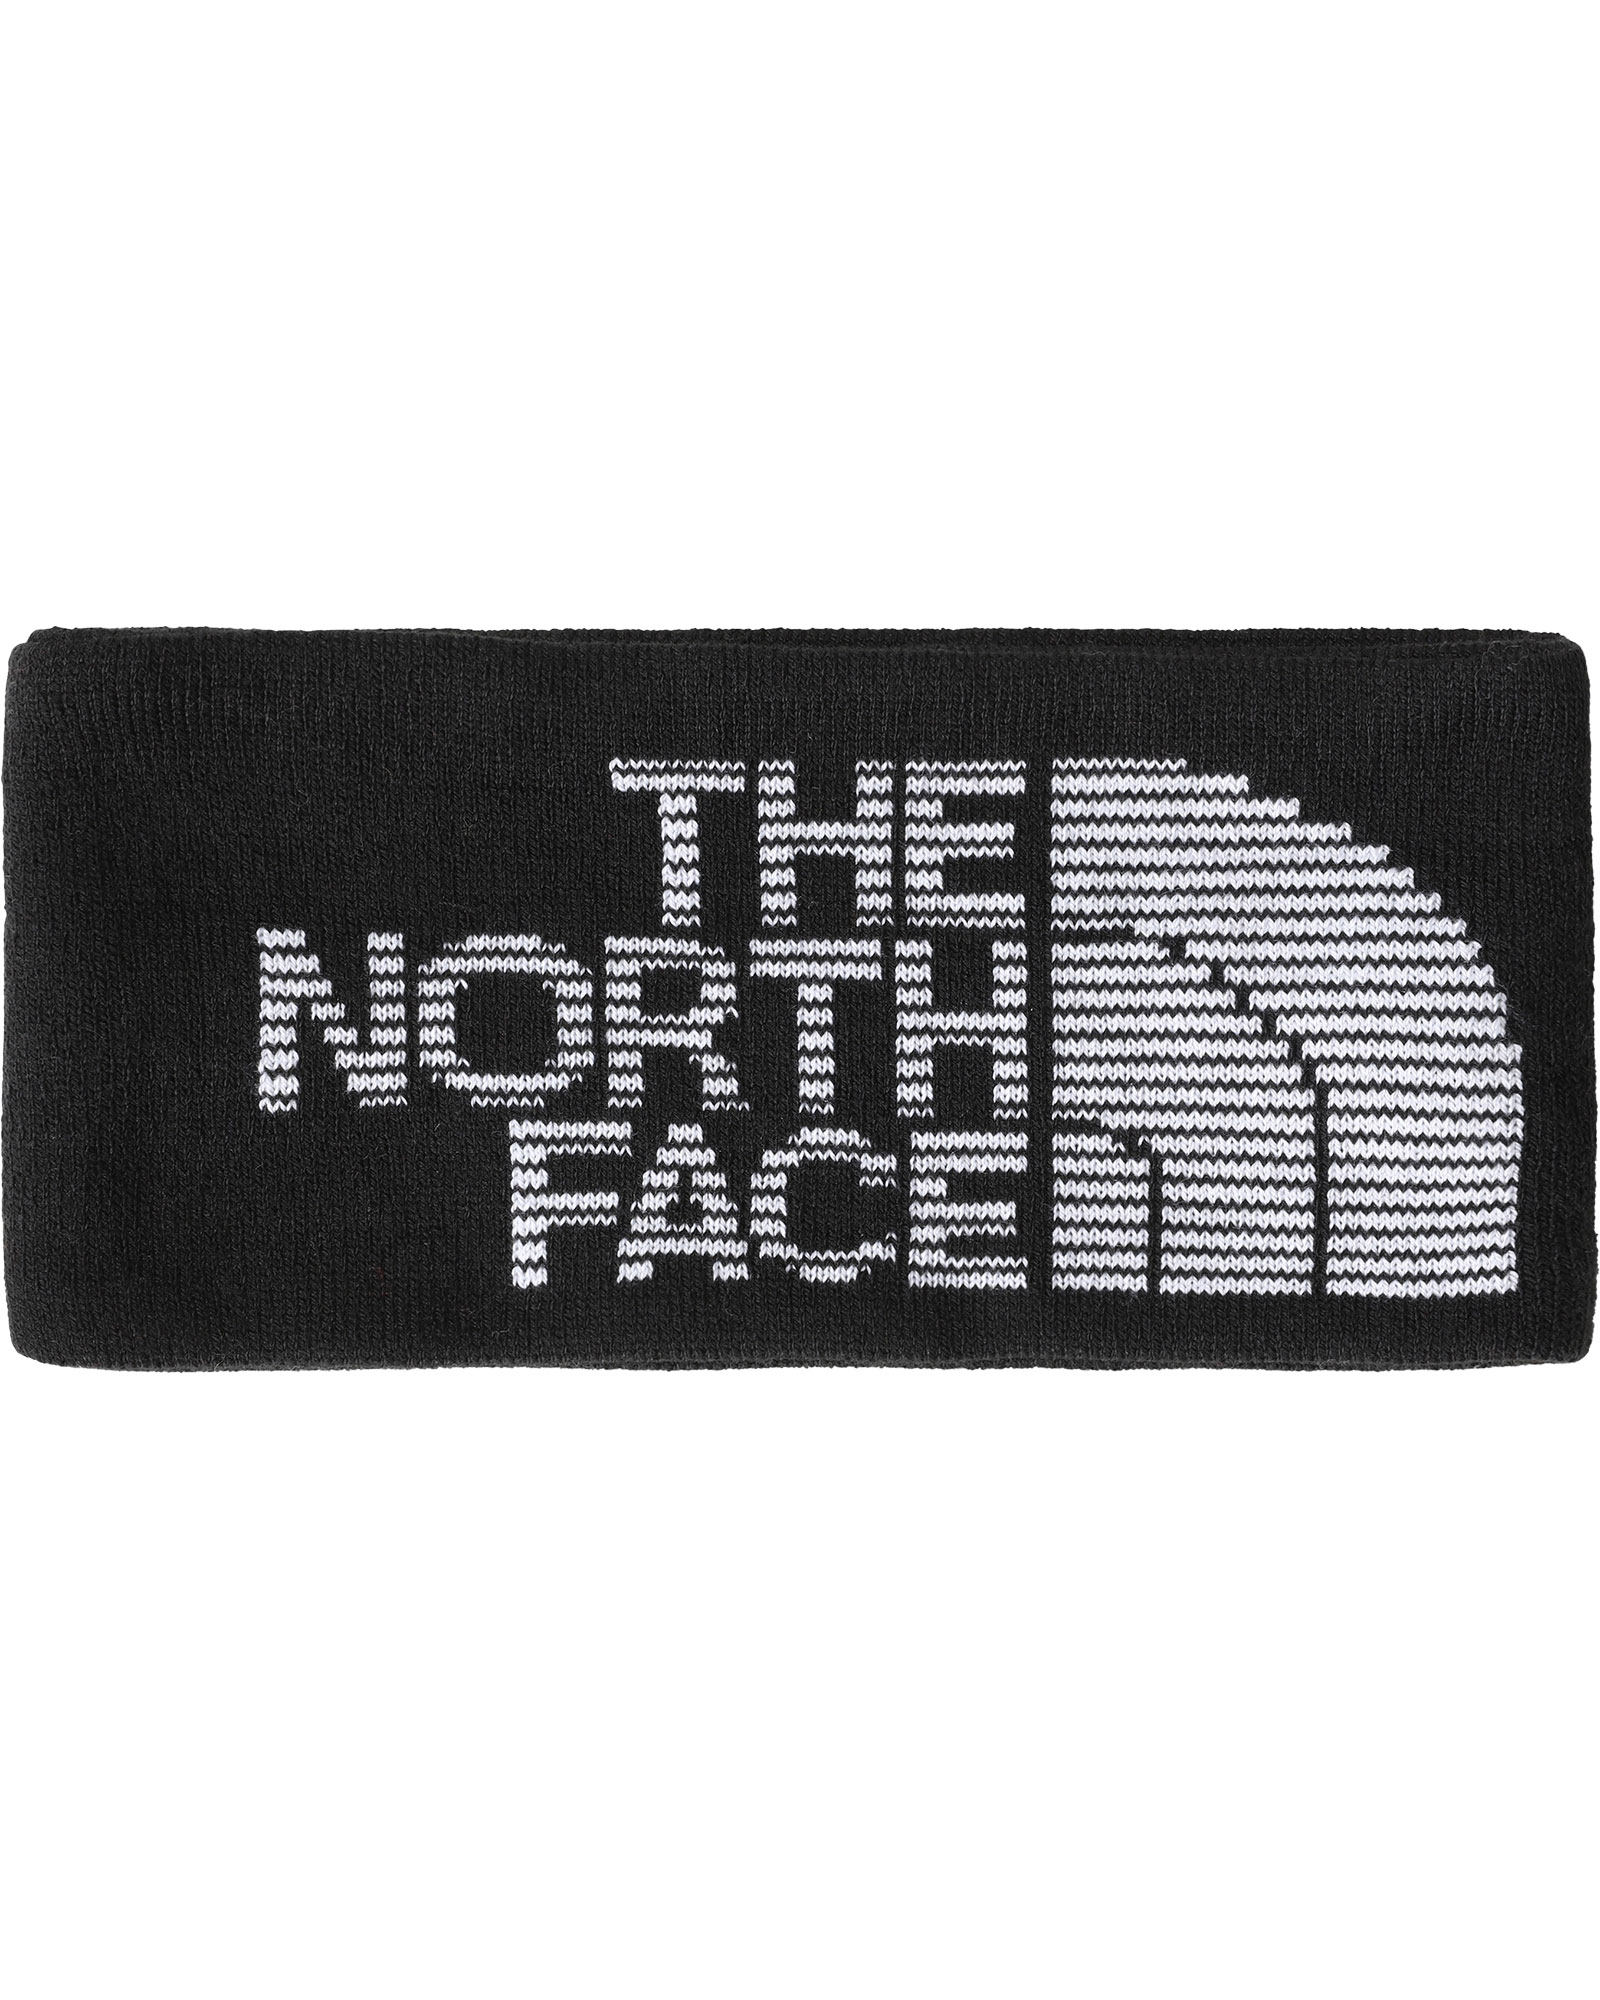 The North Face Reversible Highline Headband